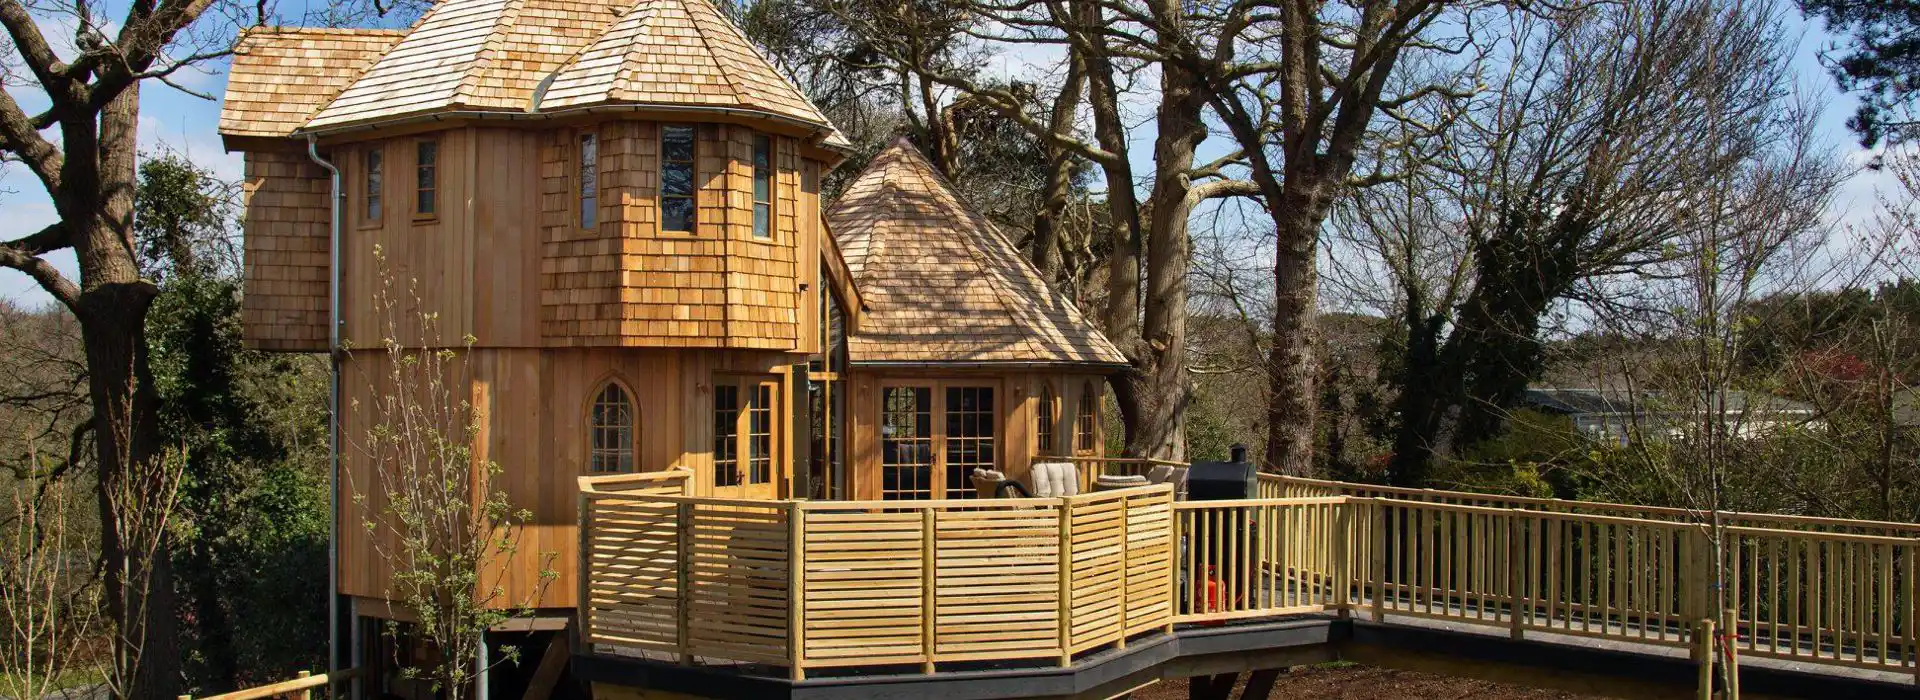 Treehouse holidays in the New Forest